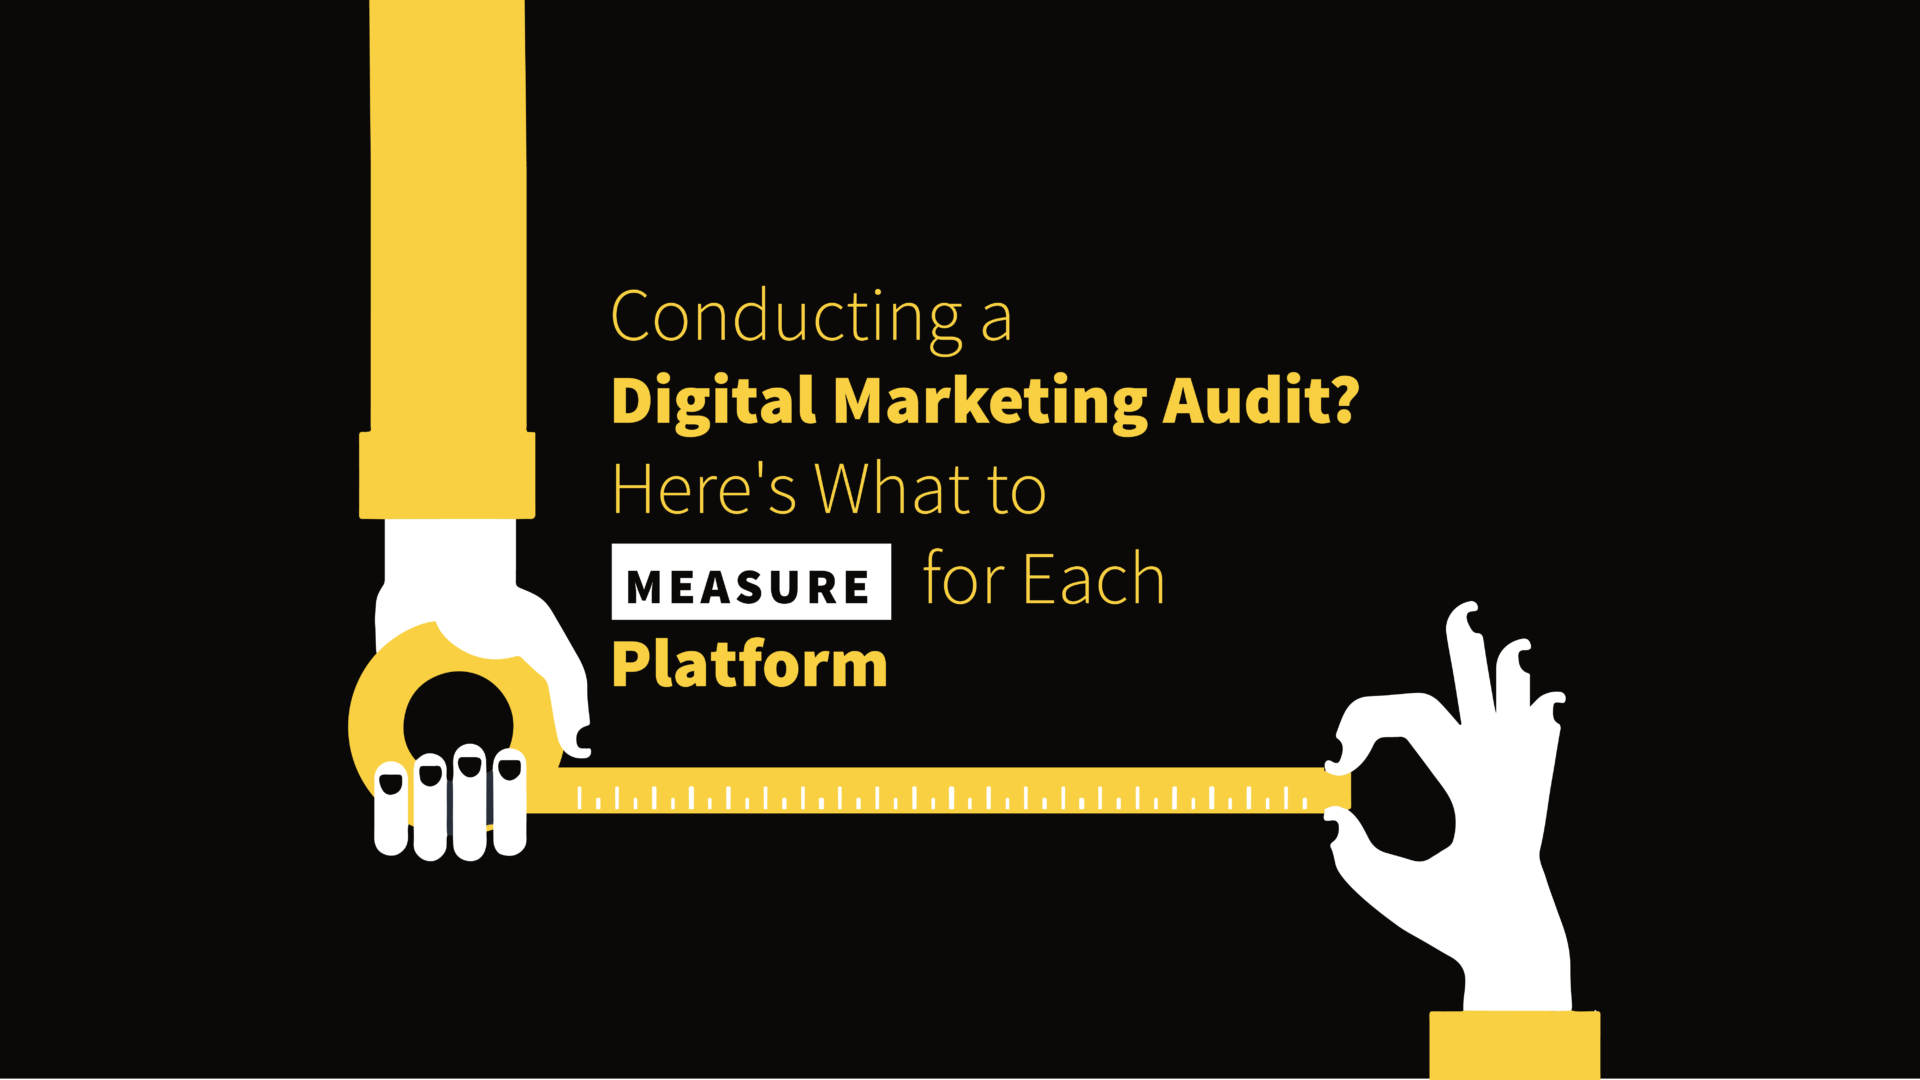 Conducting a Digital Marketing Audit? Here's What to Measure